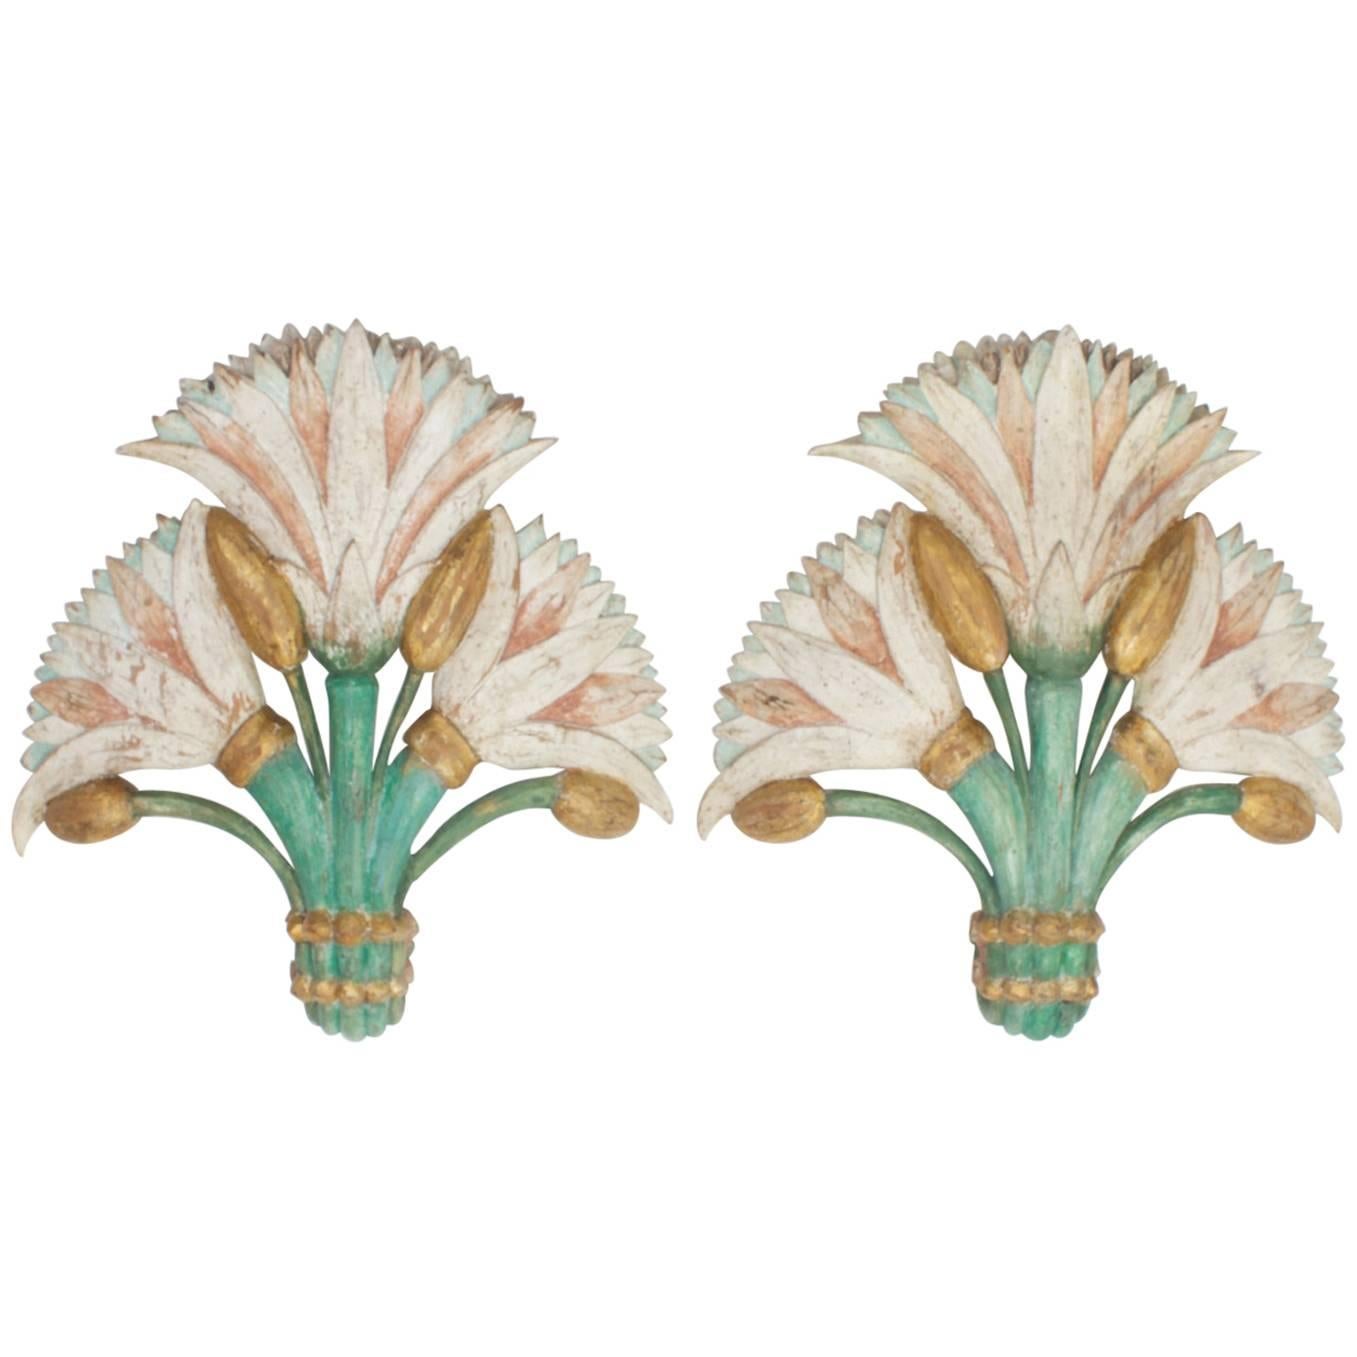 Pair of Exotic Italian Floral Carved Wood Wall Hangings